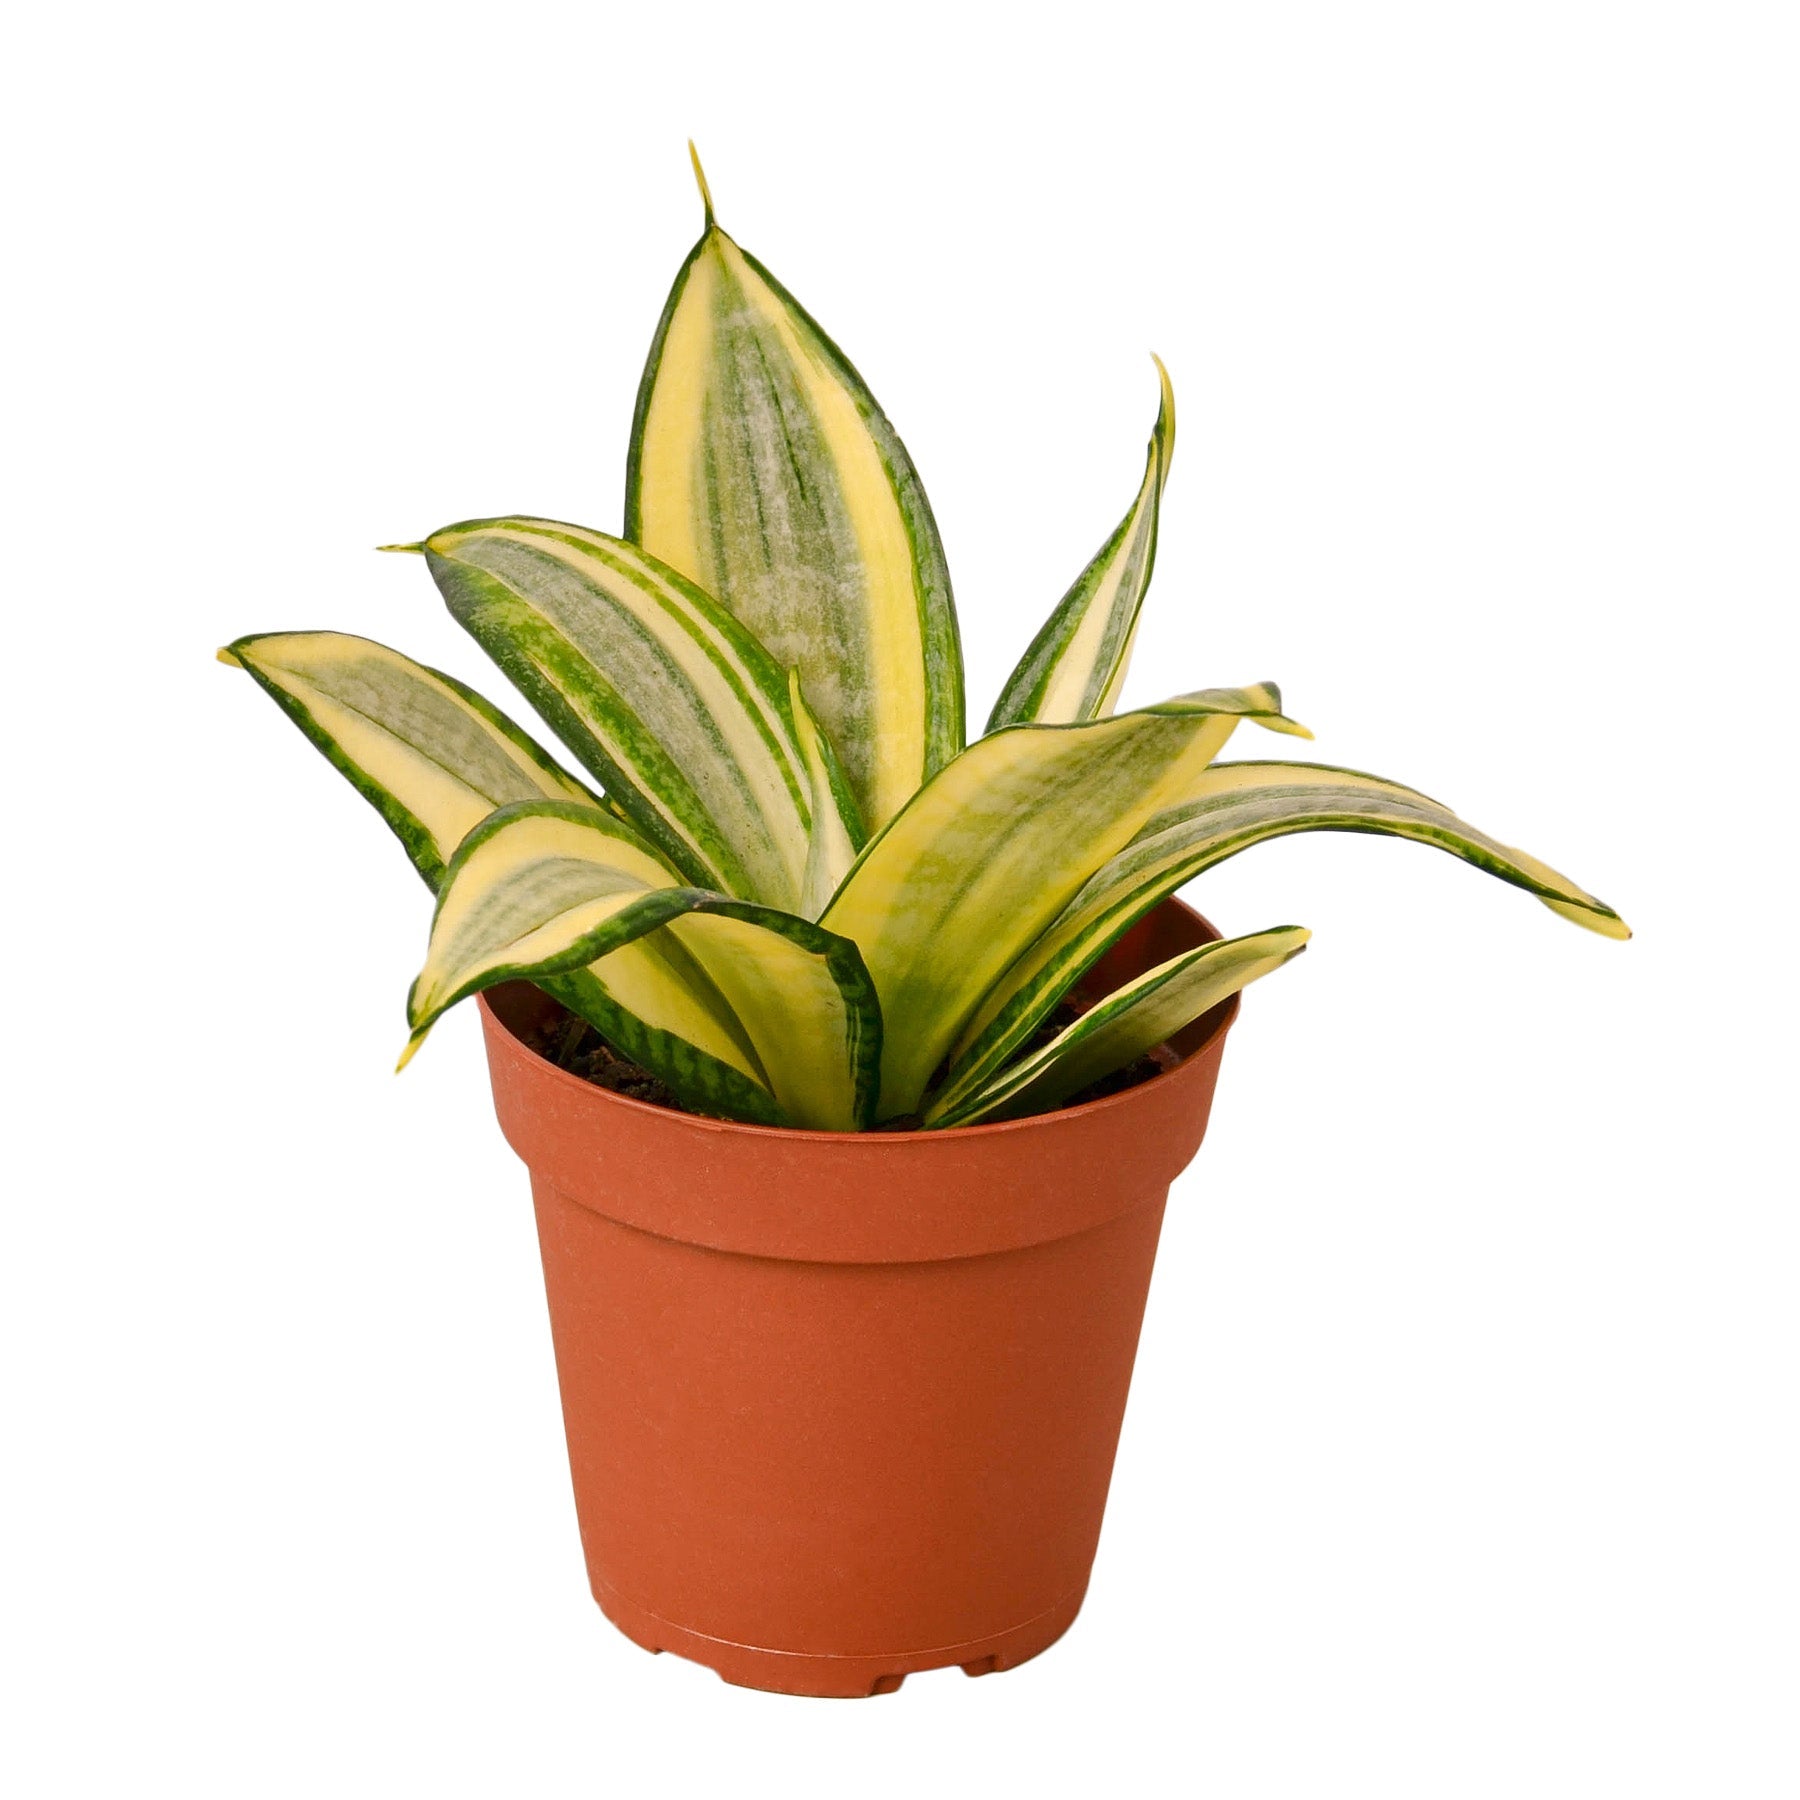 A snake plant in a pot on a white background at a plant nursery near me.